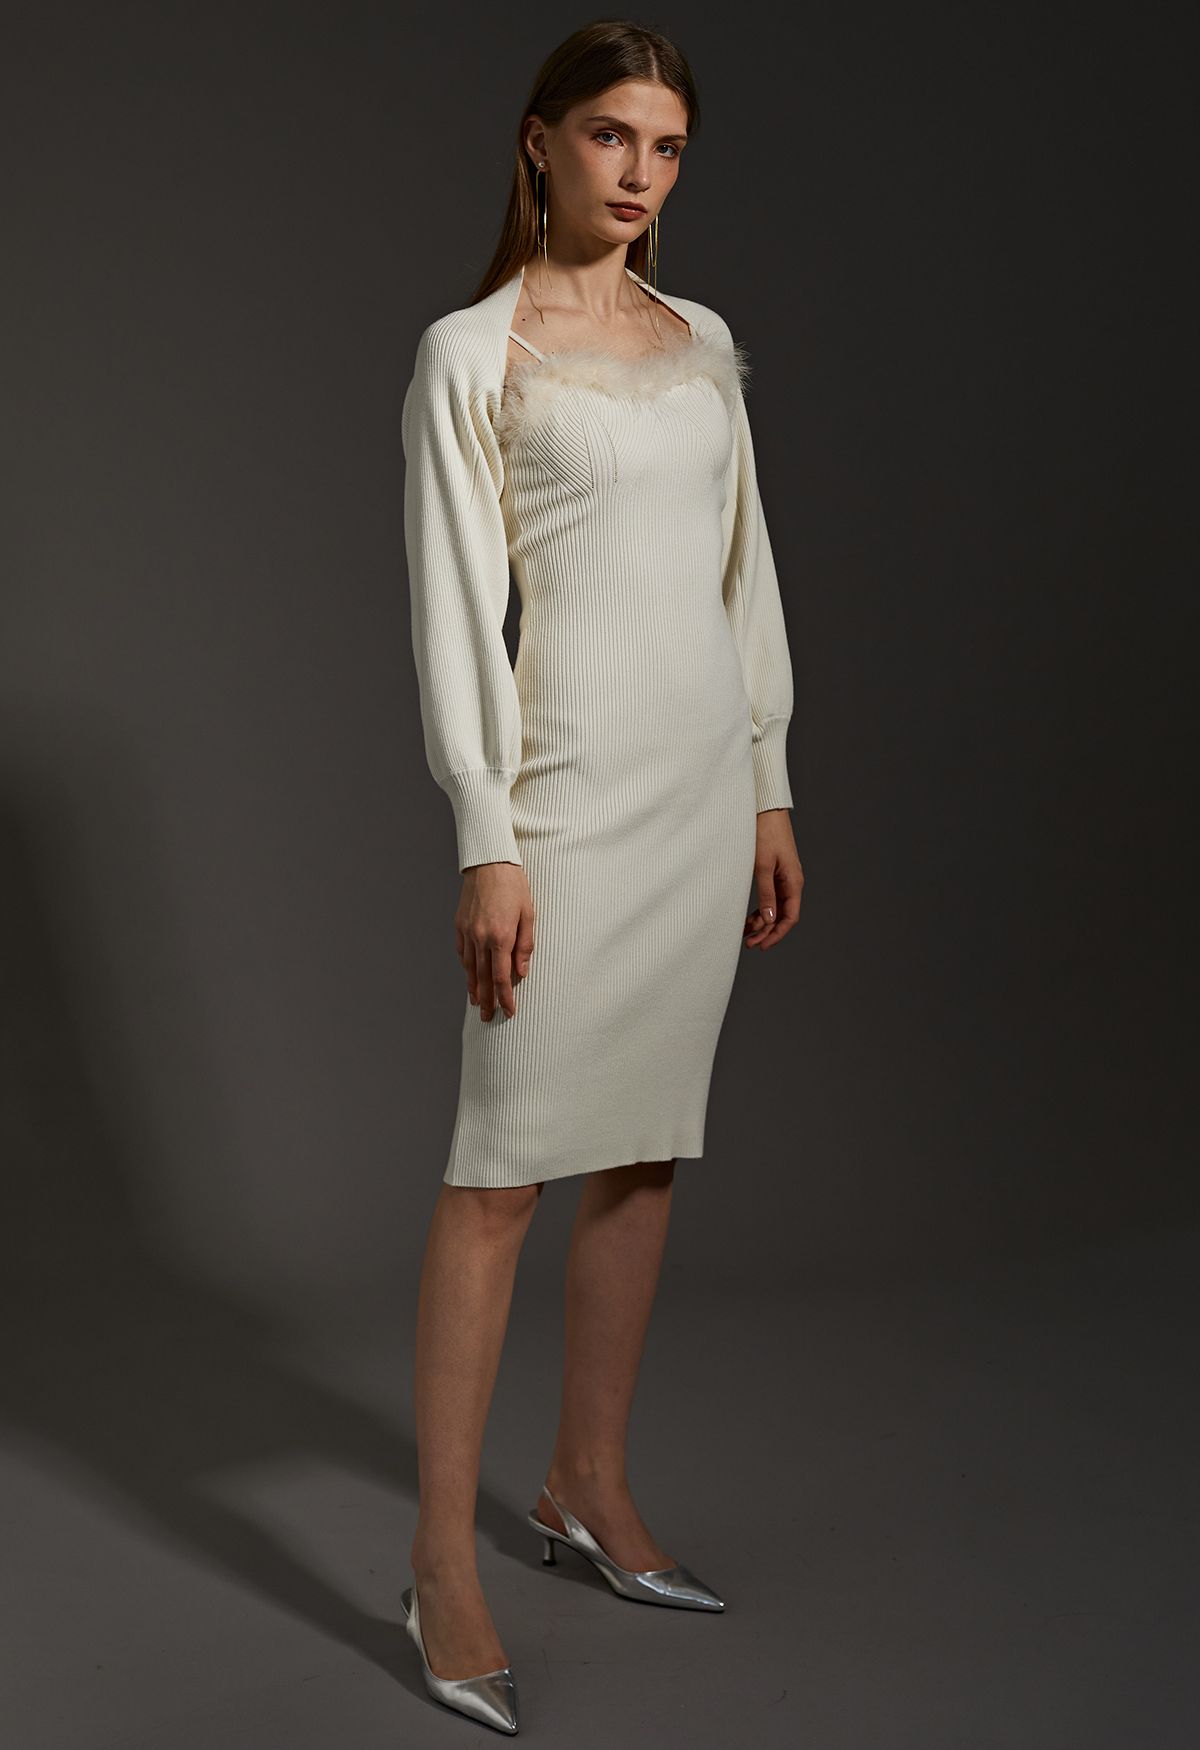 Feathered Ribbed Knit Twinset Dress in Cream